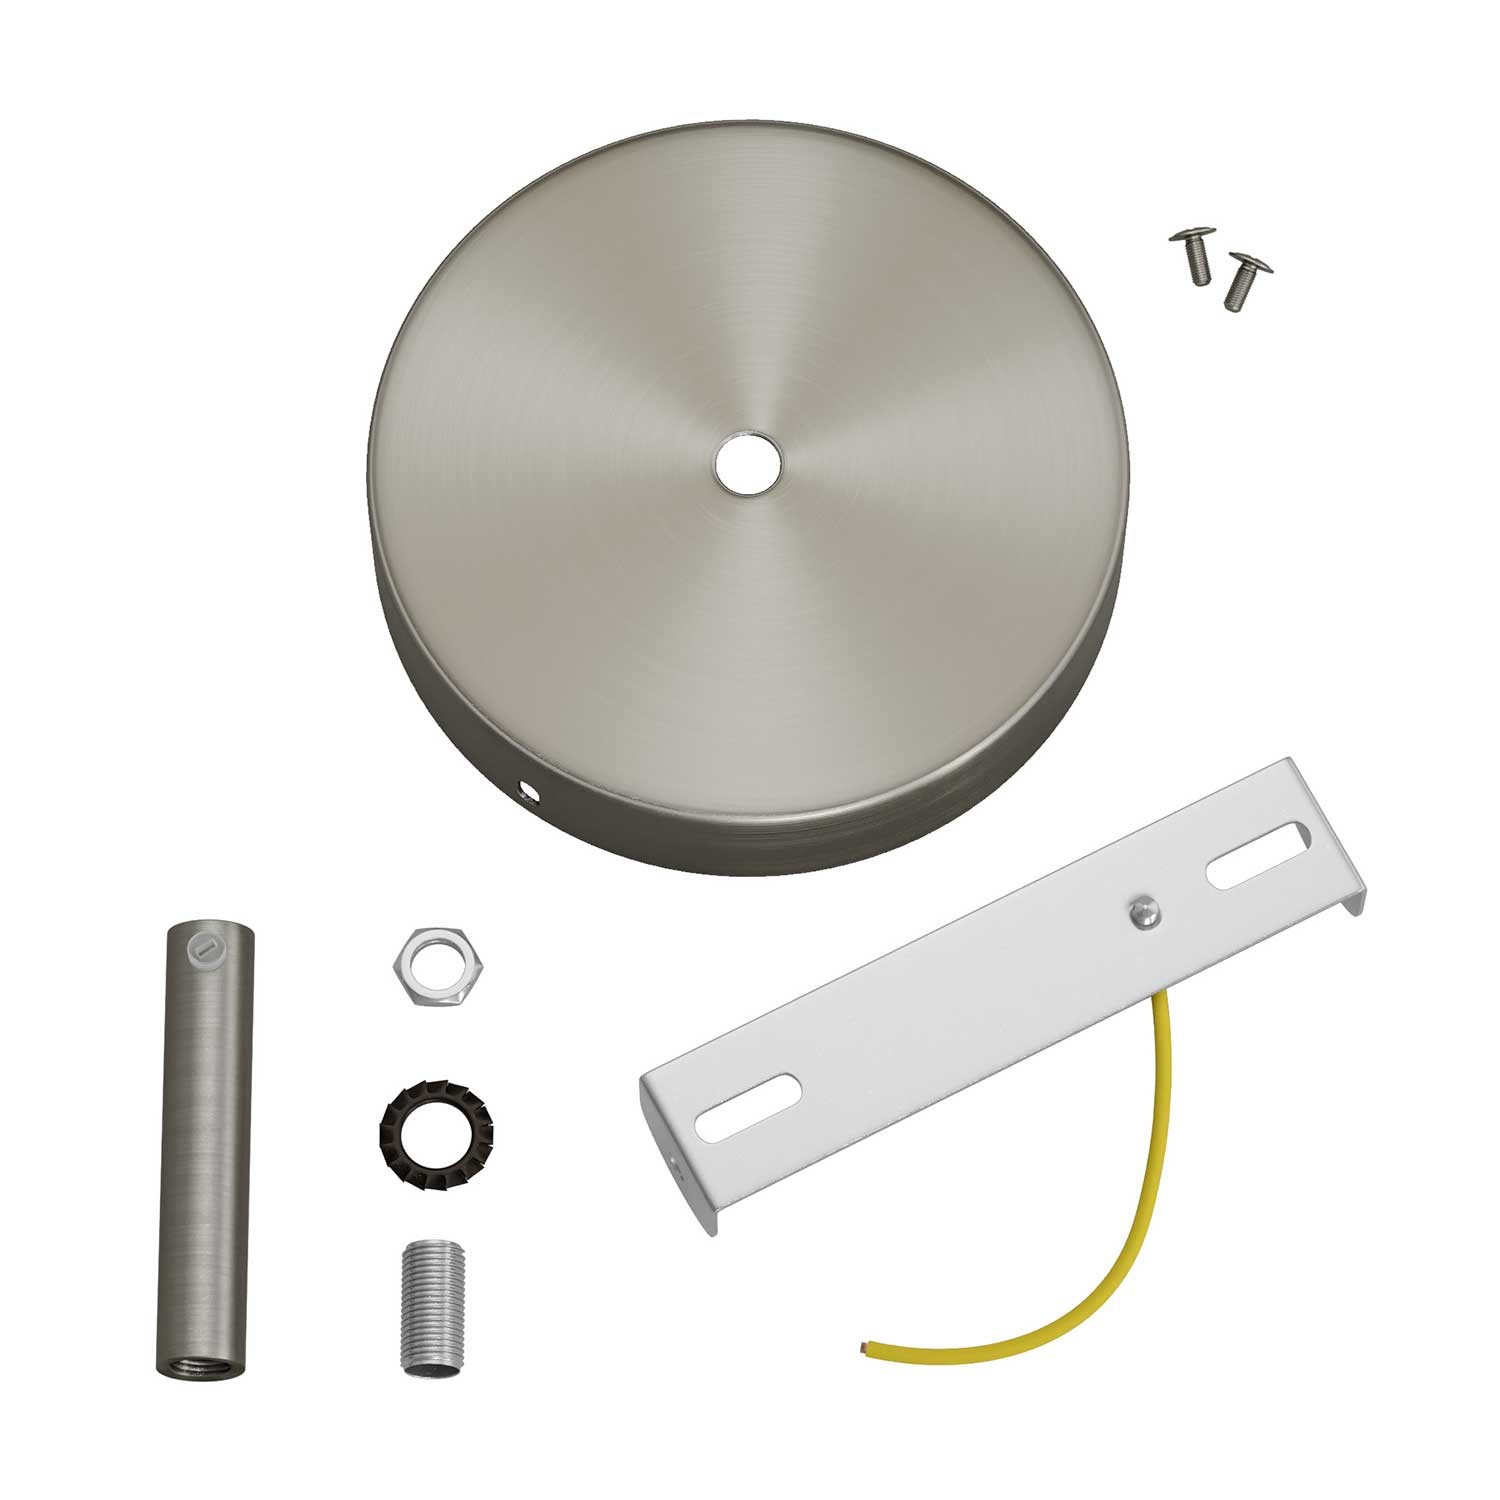 Cylindrical metal ceiling rose kit with 7 cm cable clamp